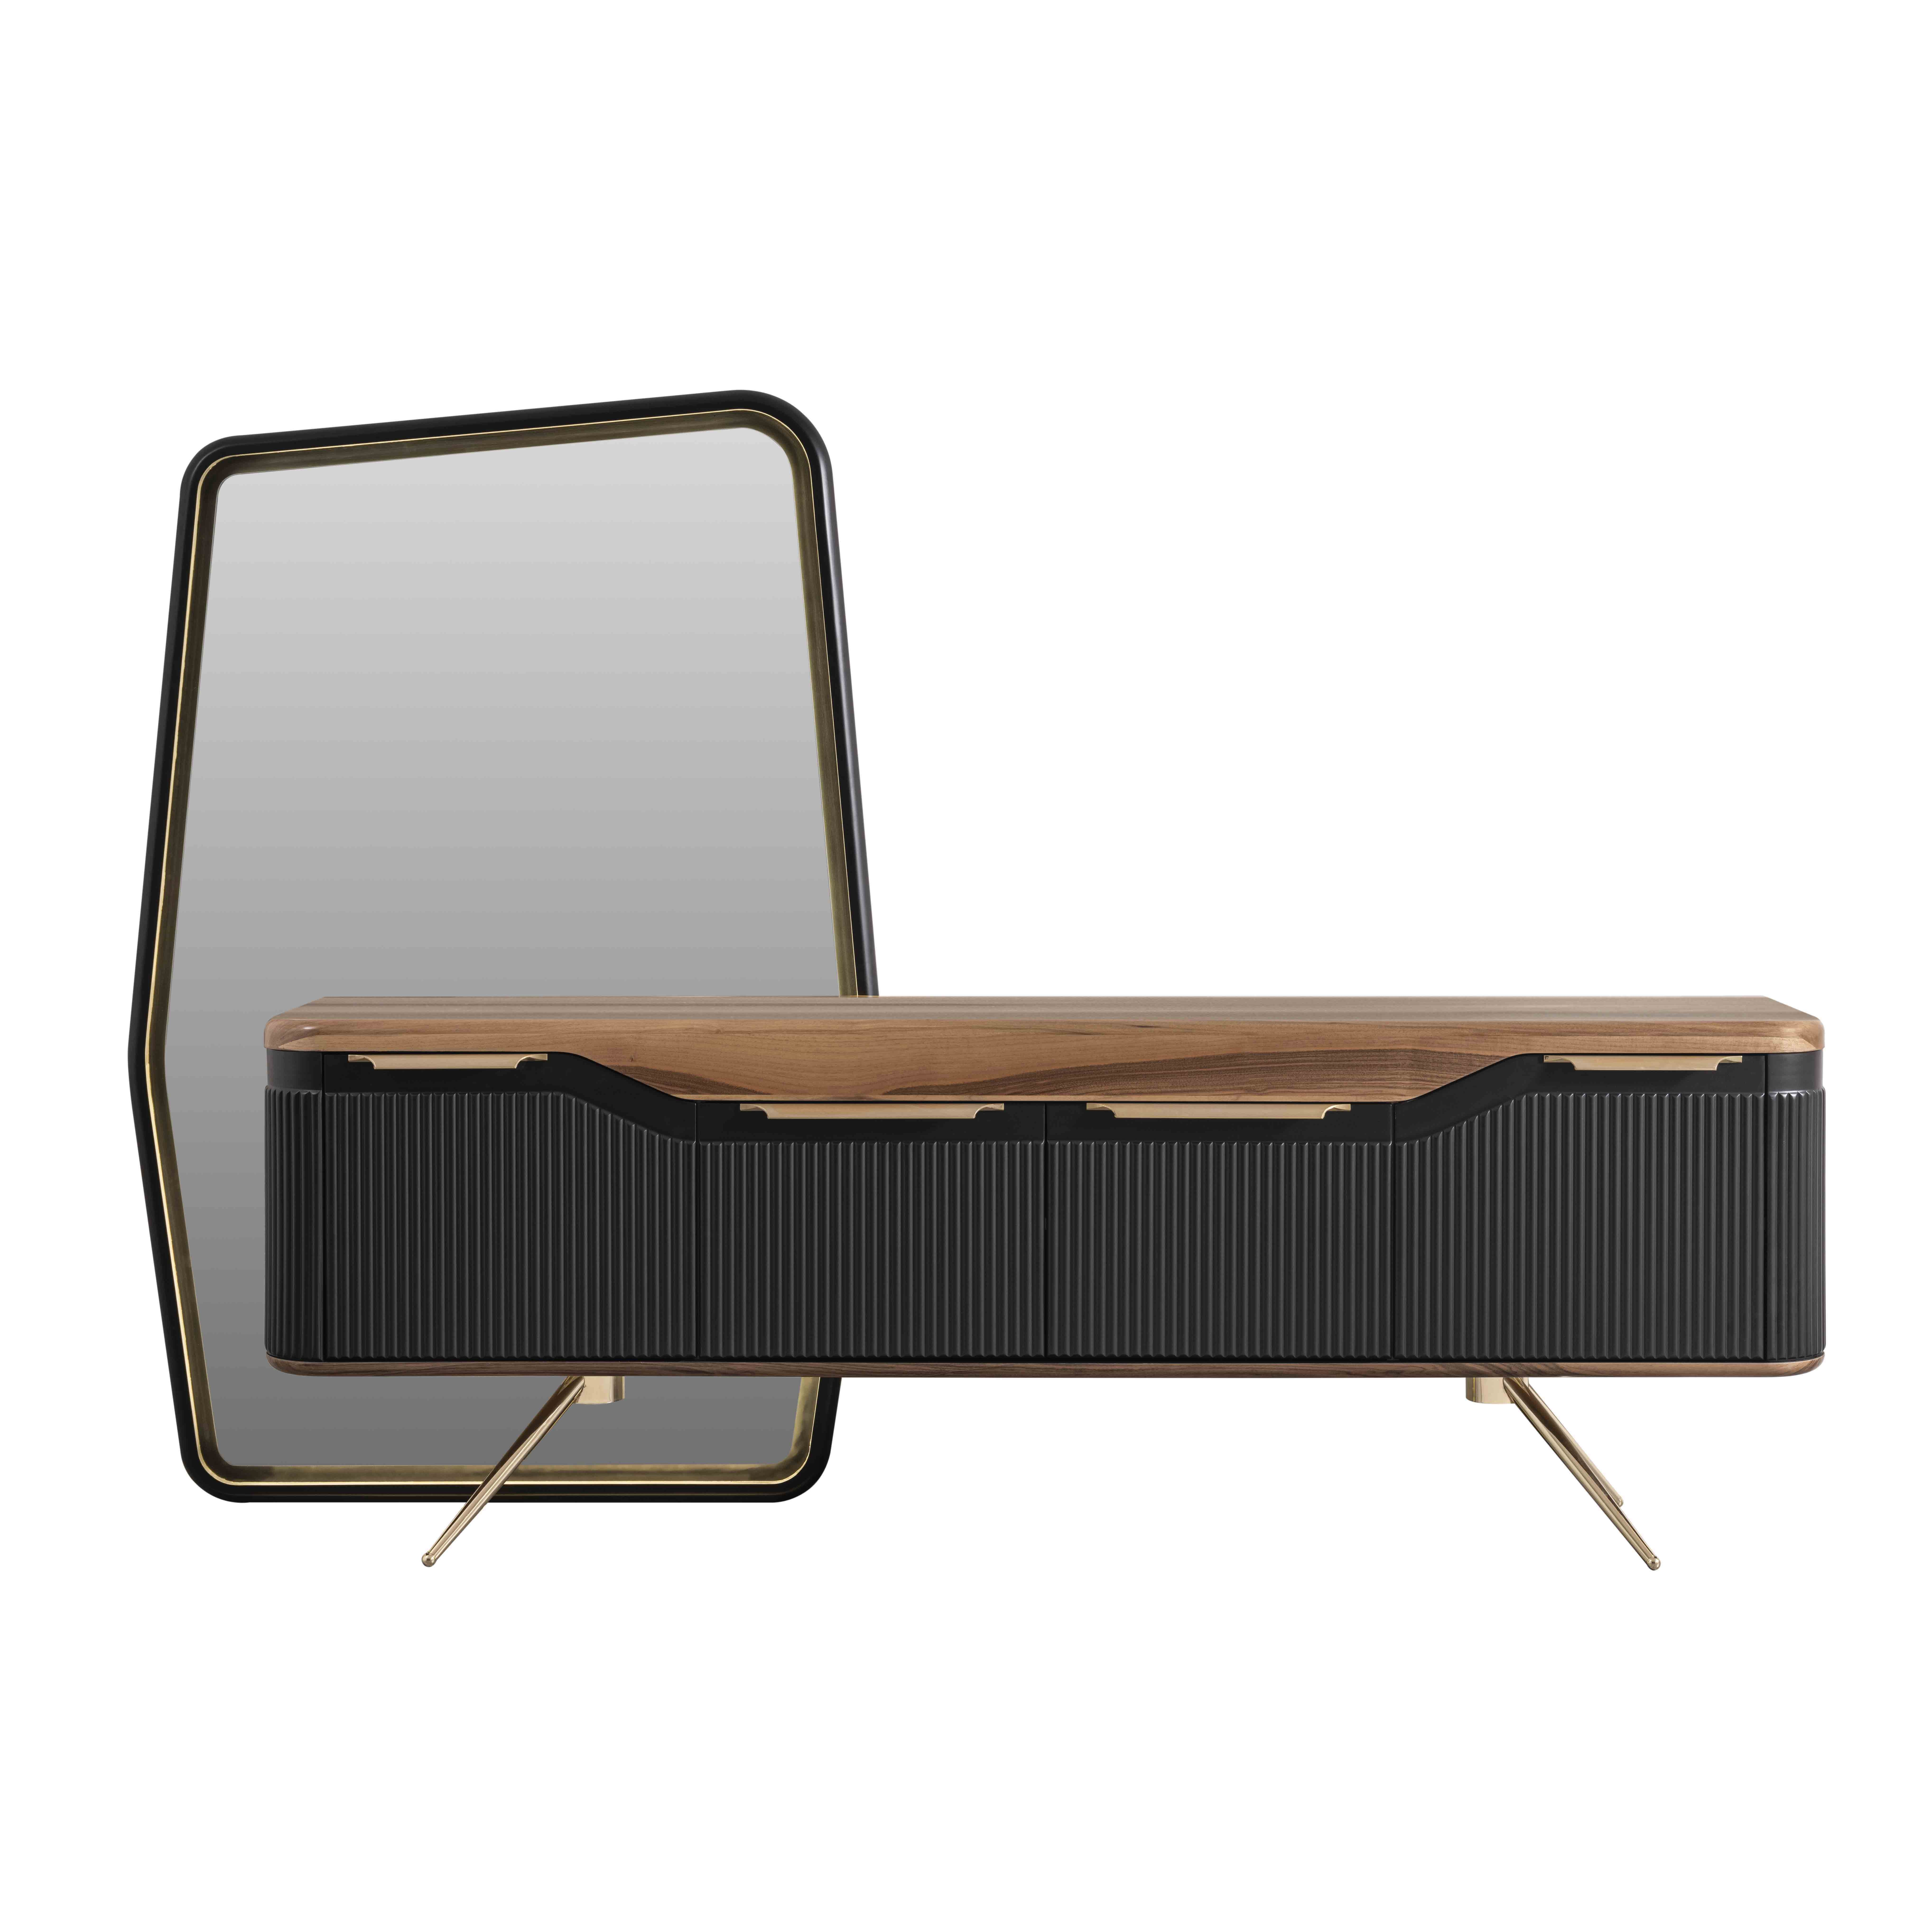 Hermes Console Mirror